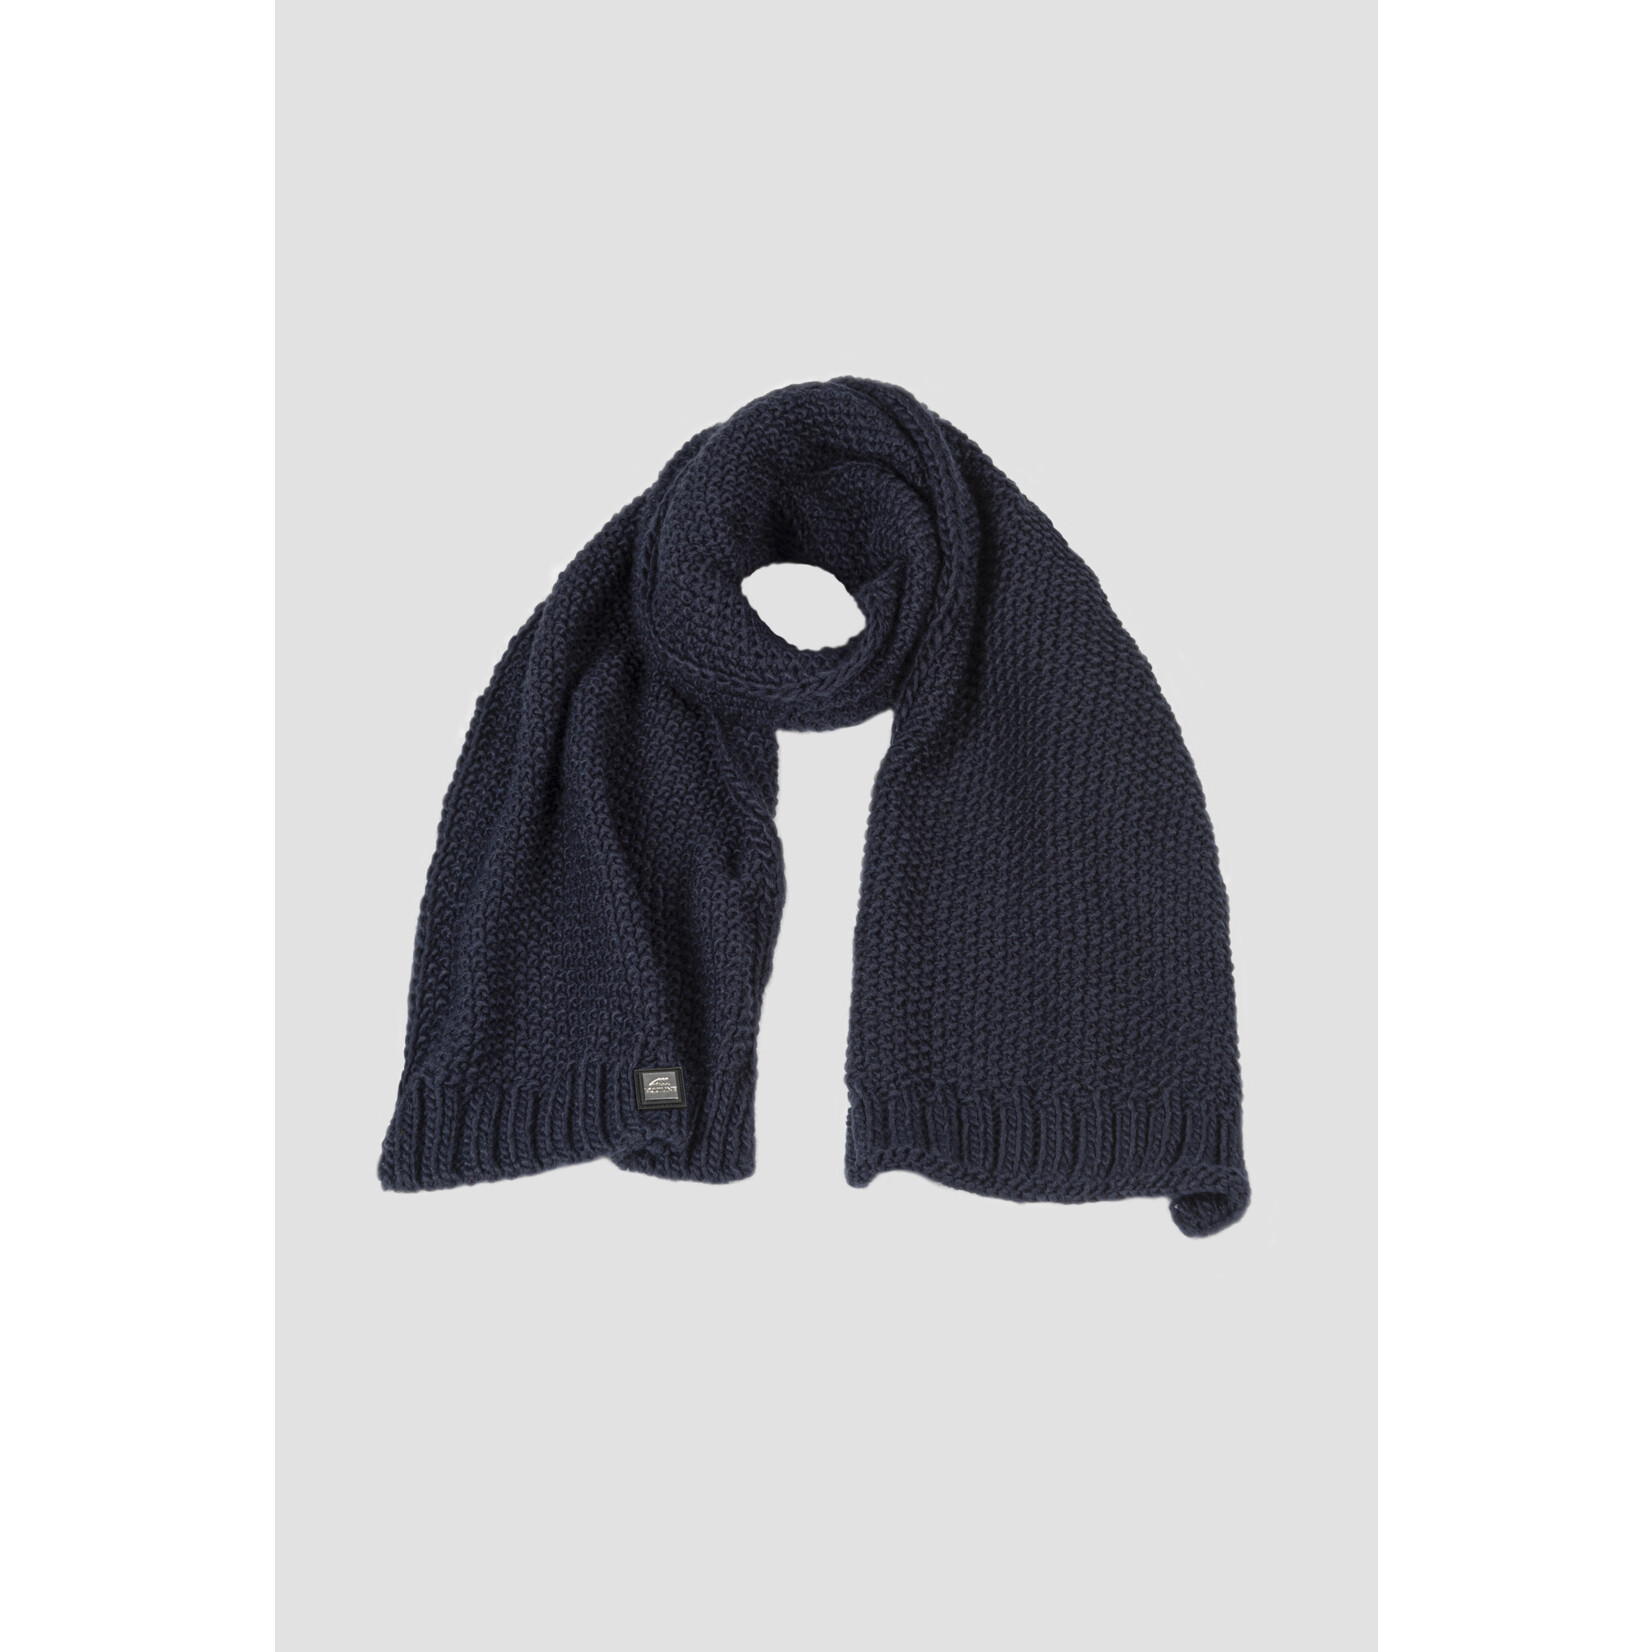 Equiline T11341 Equiline Chaltec Knit Scarf